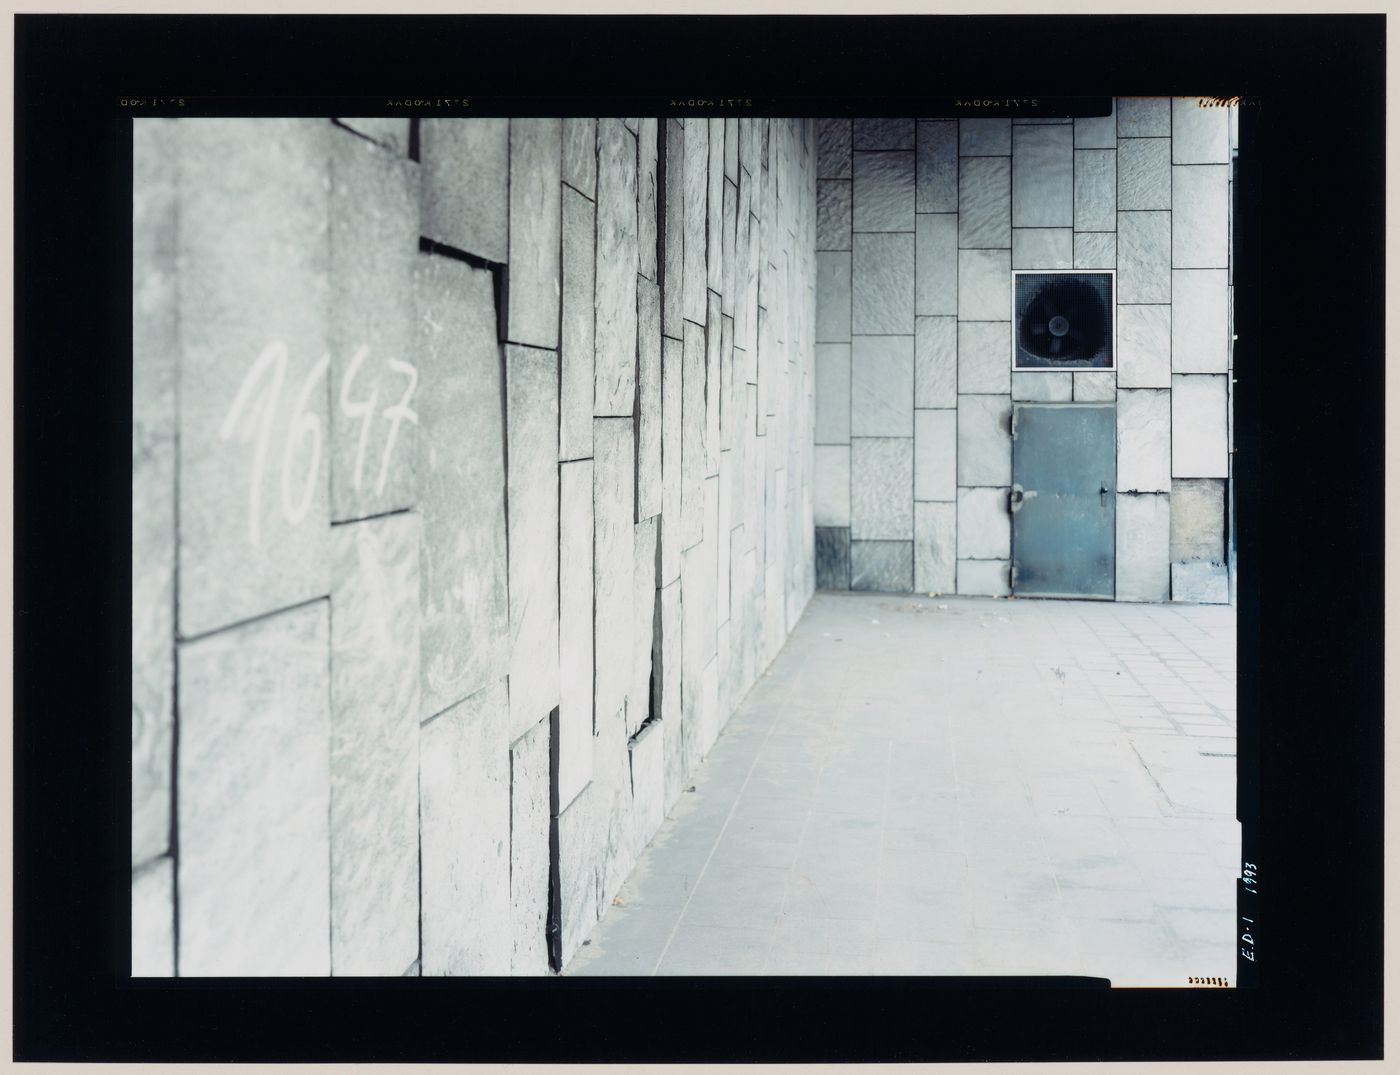 Interior view of a concourse or passage showing wall tile, Essen, Germany (from the series "In between cities")